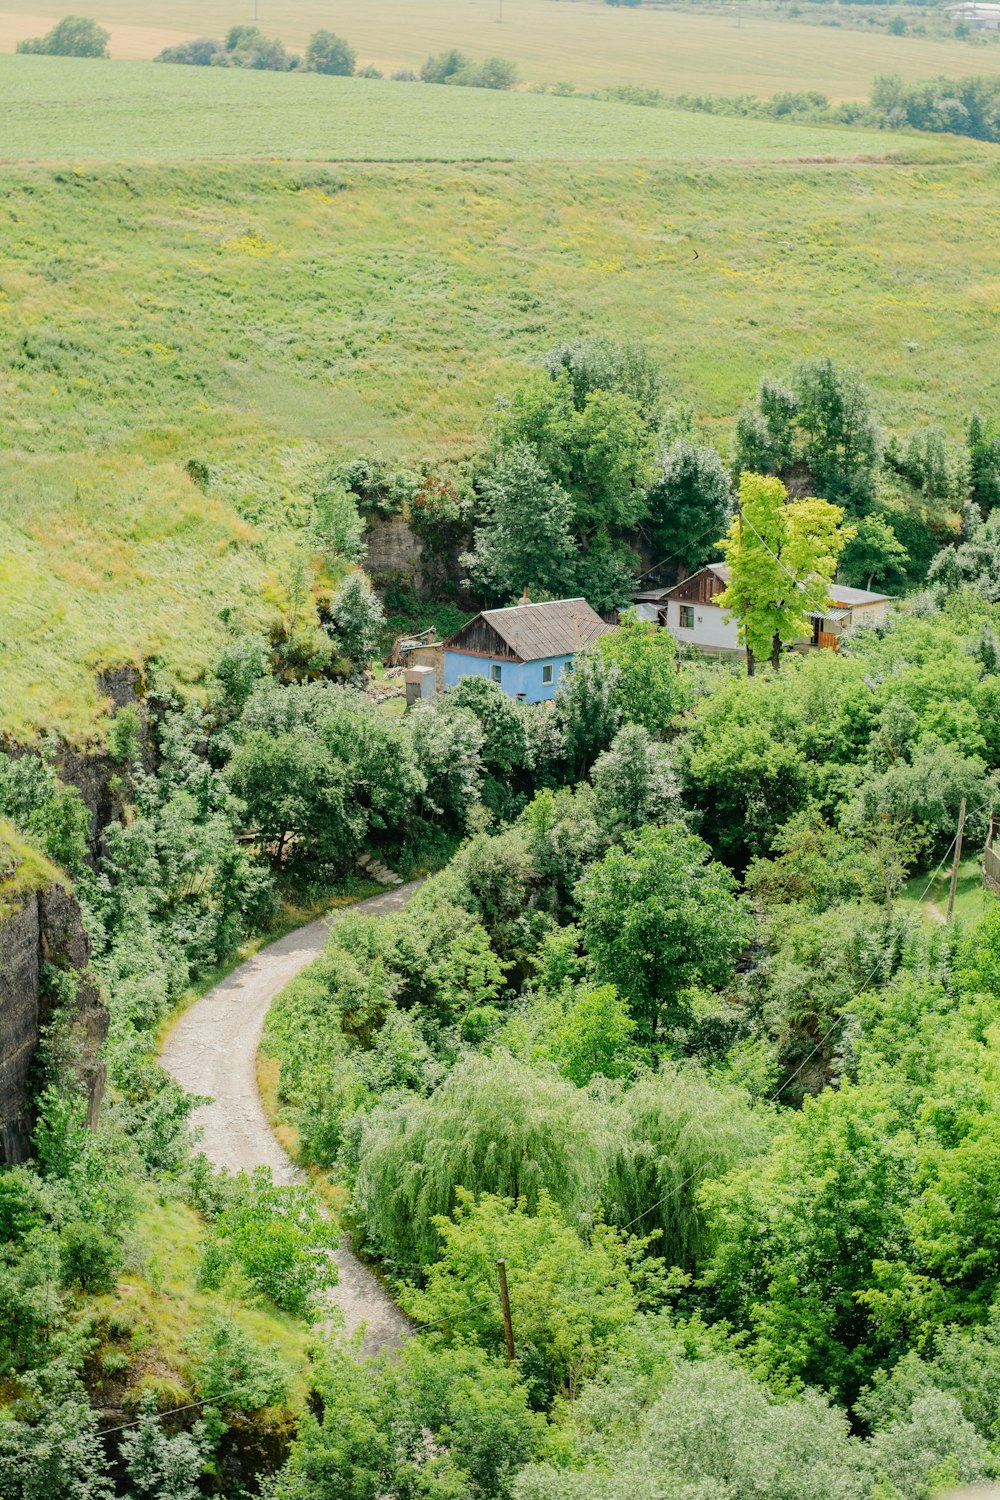 an aerial view of a house in the middle of a lush green field